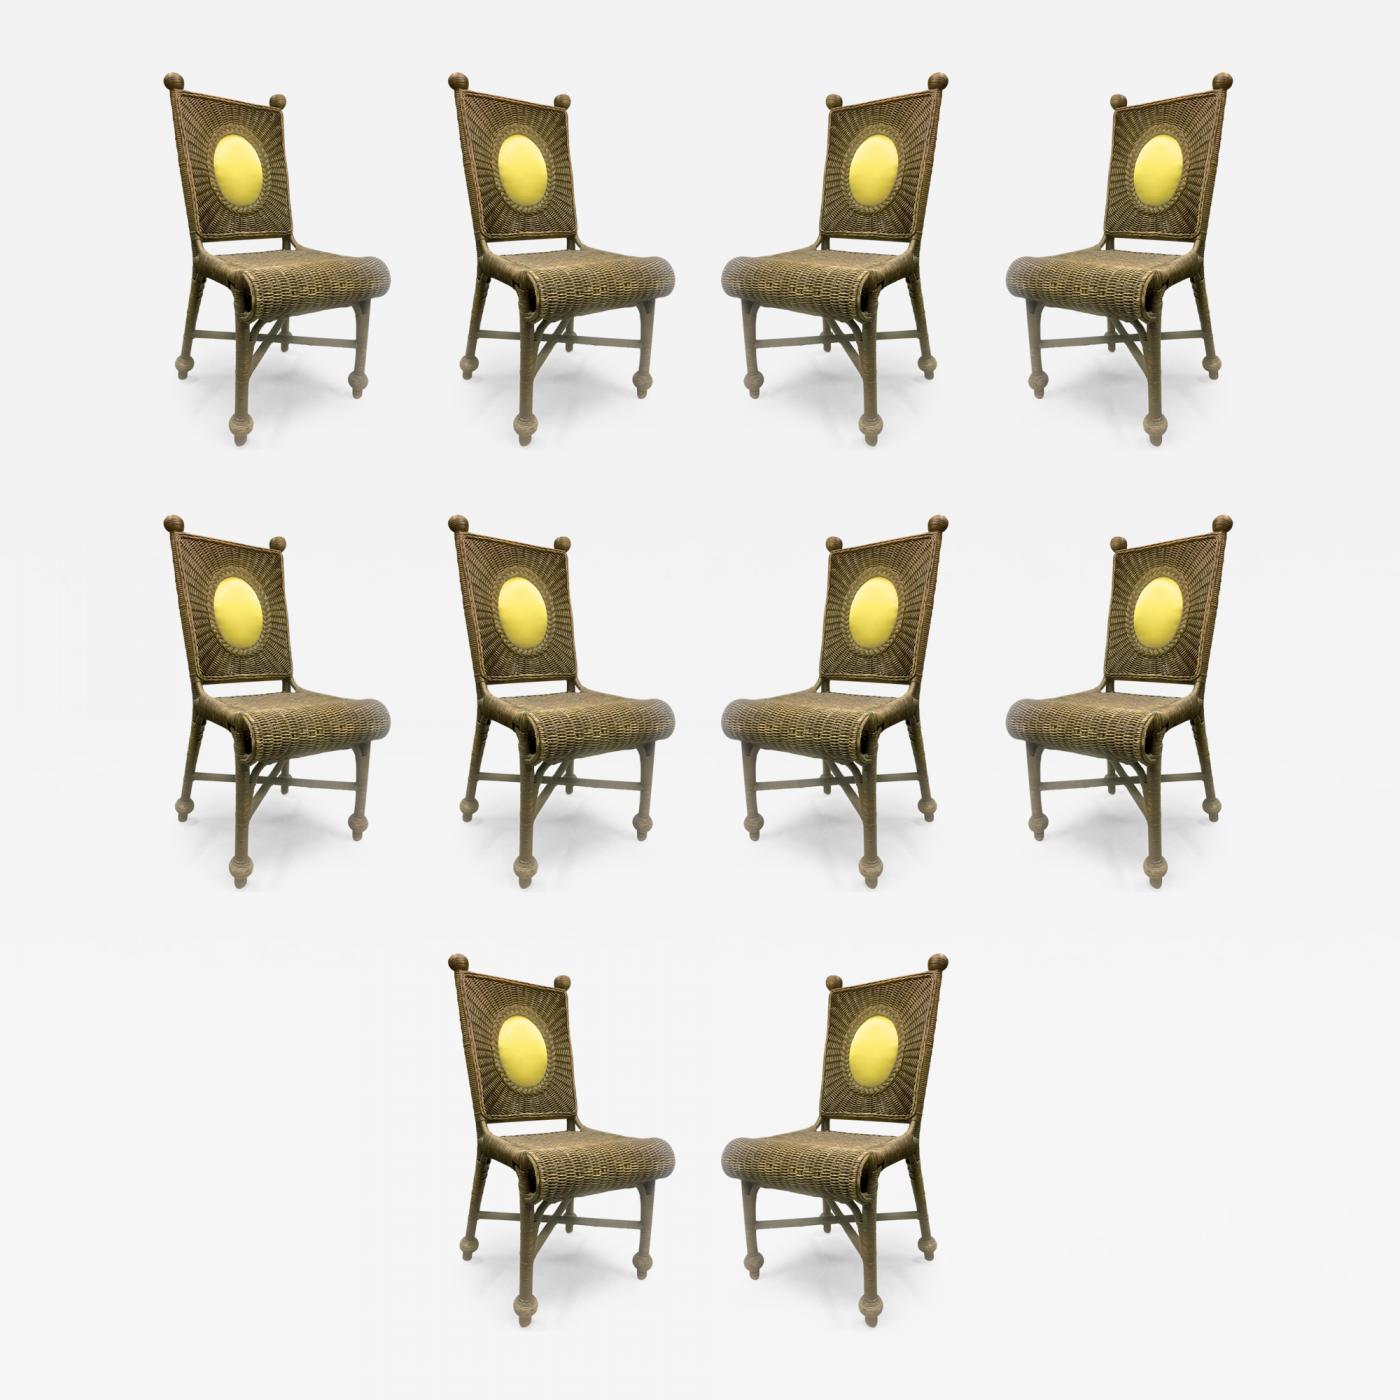 Charlotte Perriand Les Arcs Set of 10 Dining Chairs with Sheepskin Cushions